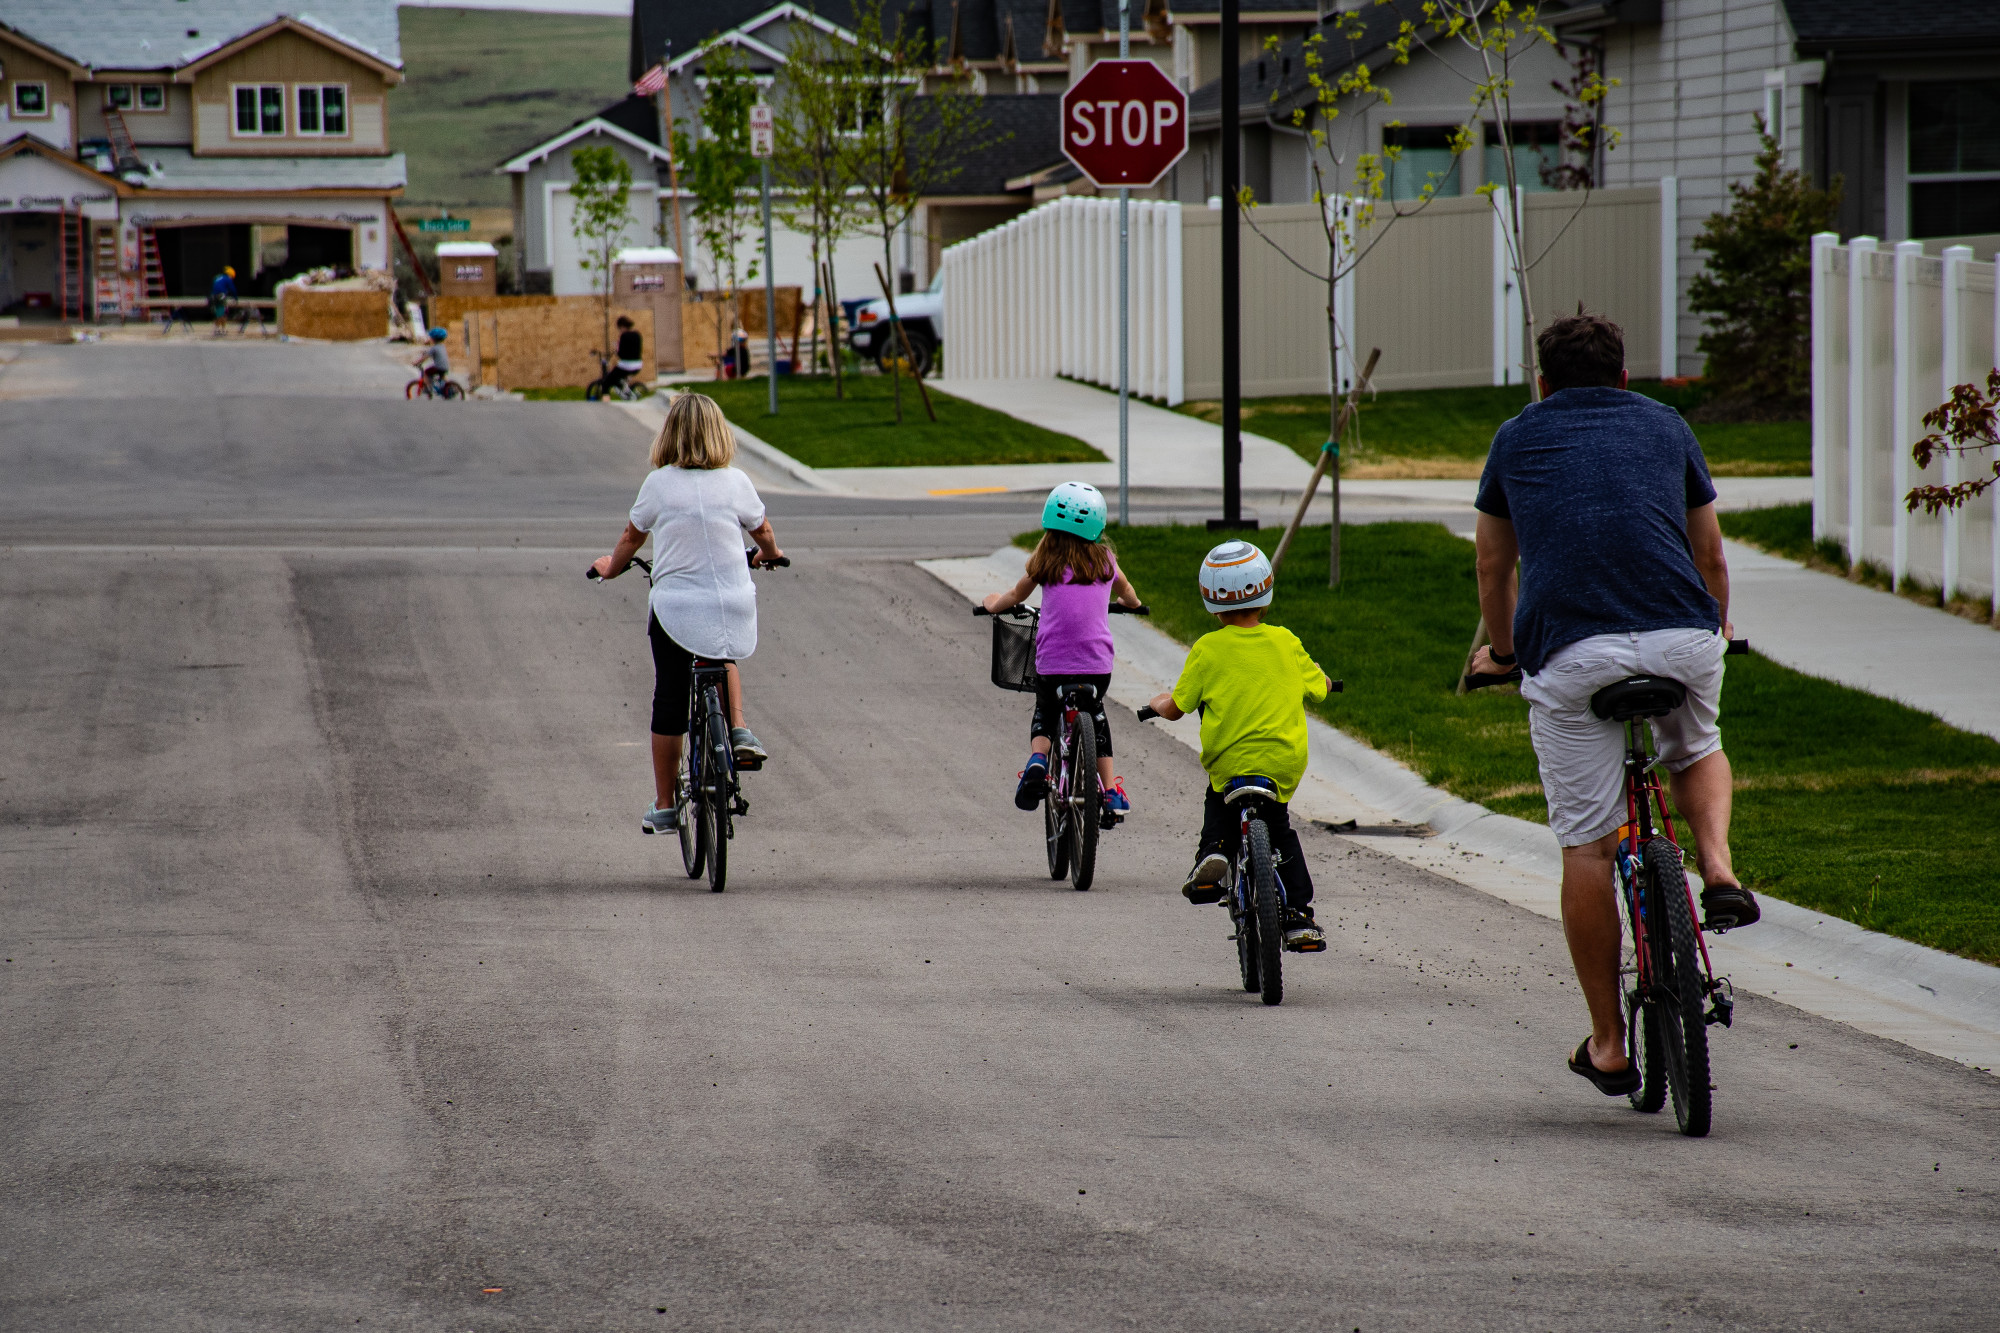 Bicycle Safety Tips to Teach Your Children